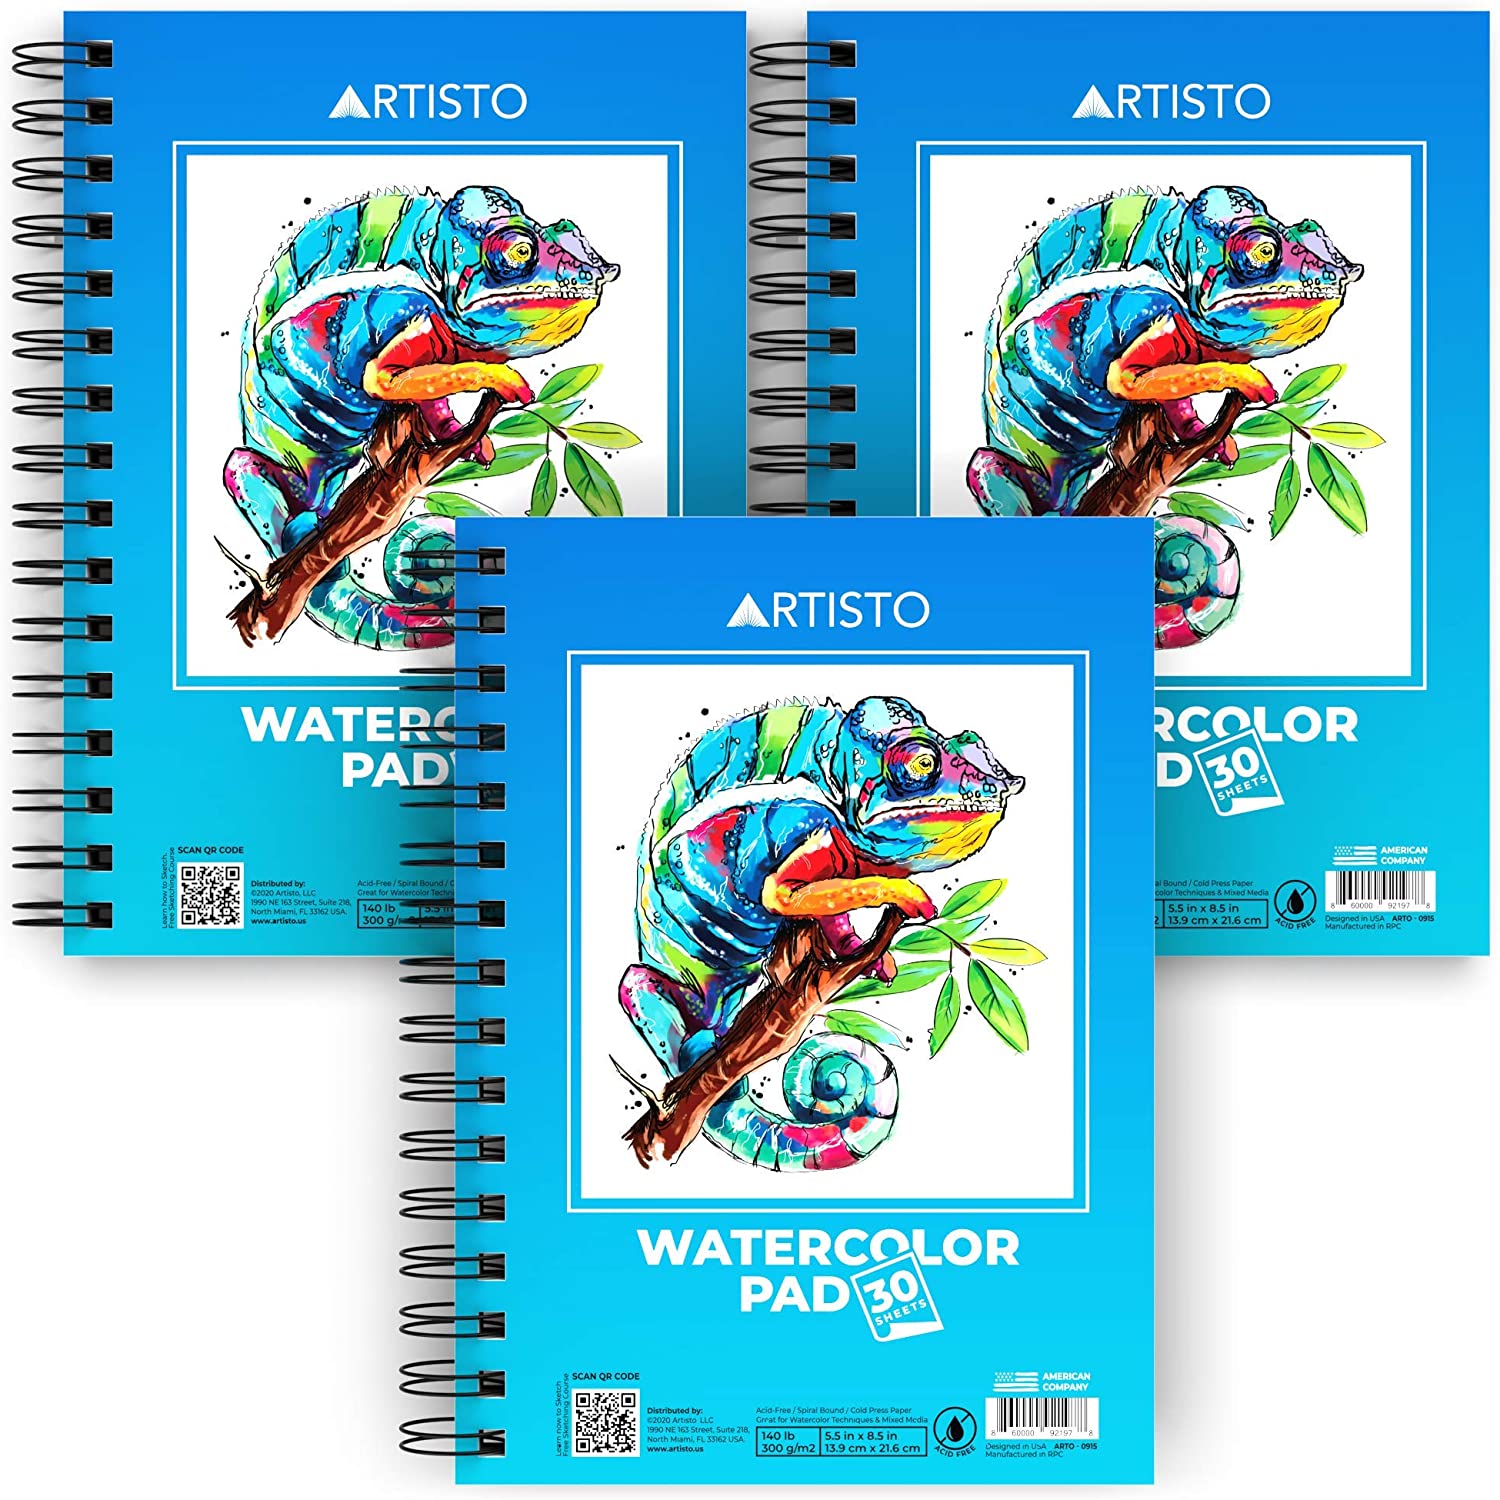 Artisto Watercolor Pads 5.5X8.5”, Pack of 3 (90 Sheets), Spiral Bound, Acid-Free Paper, 140lb (300Gsm), Perfect for Most Wet & Dry Media, Ideal for